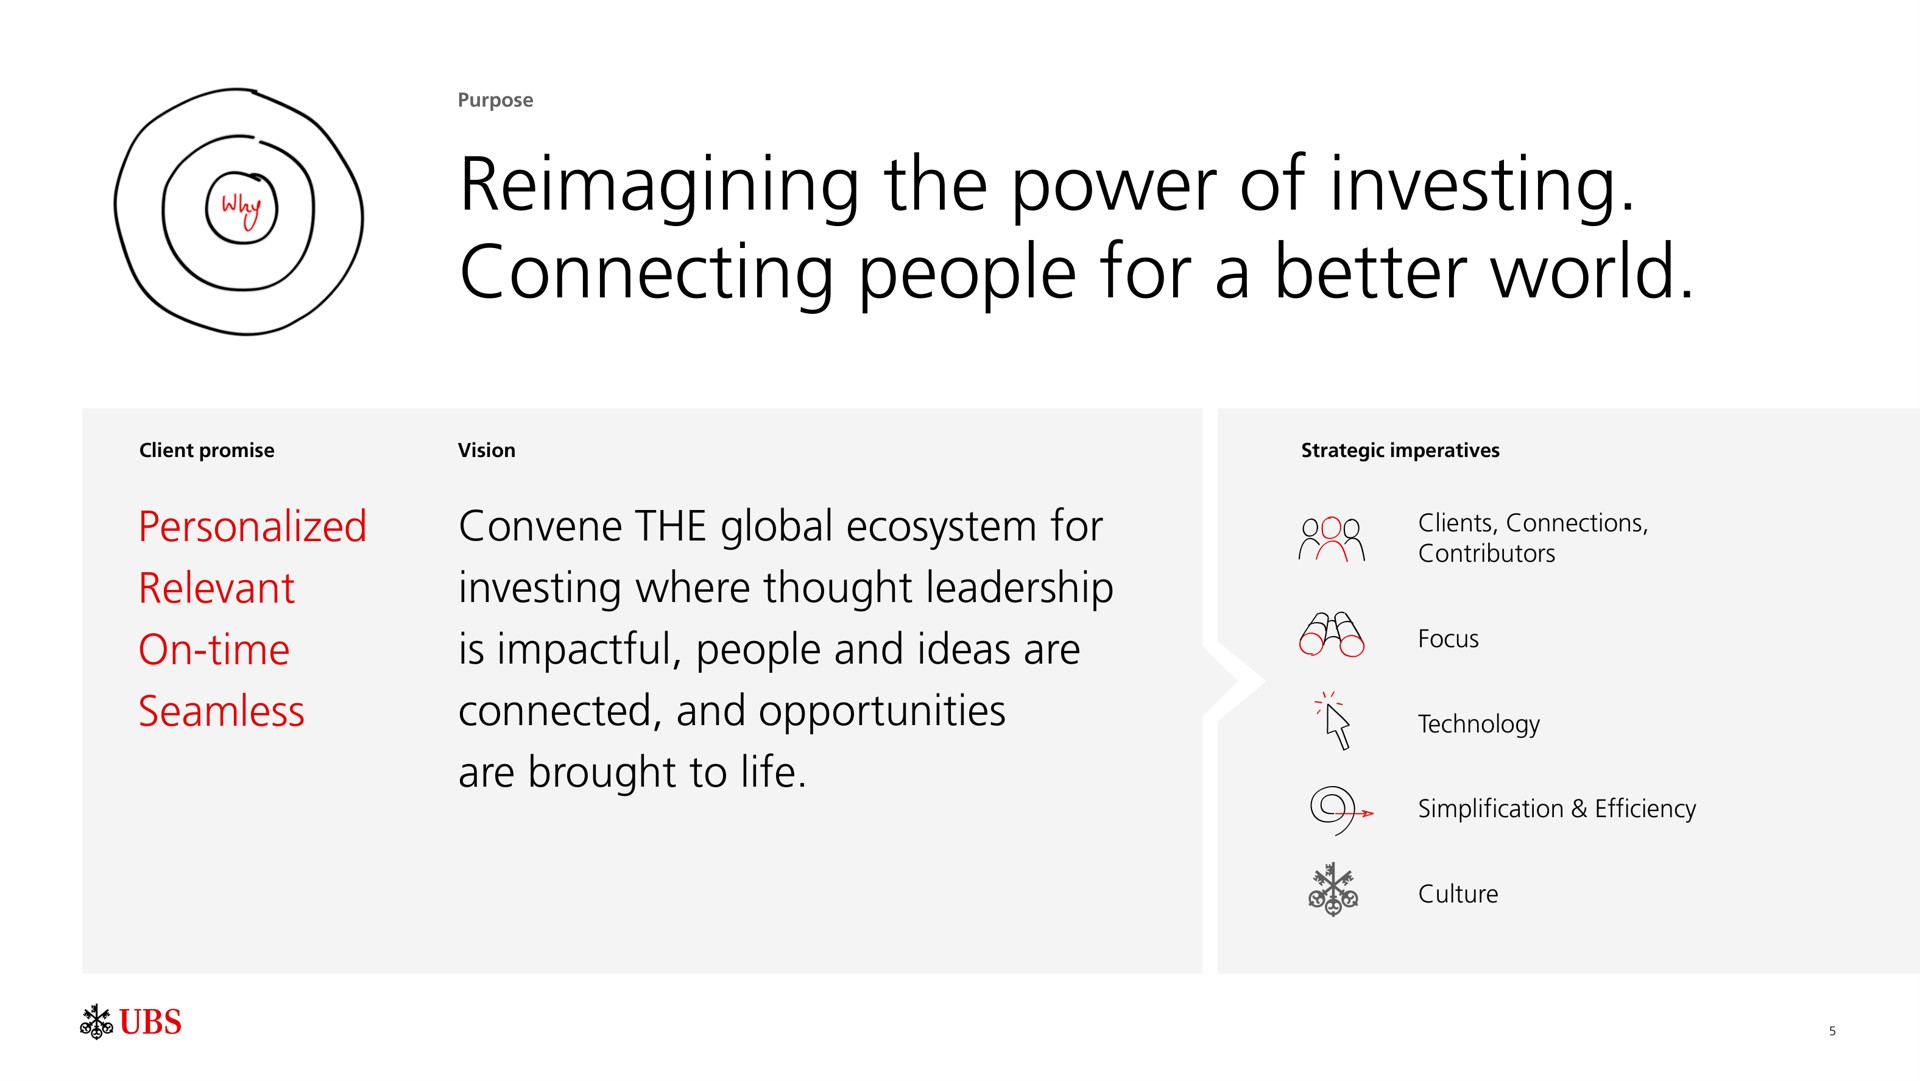 the power of investing connecting people for a better world | UBS